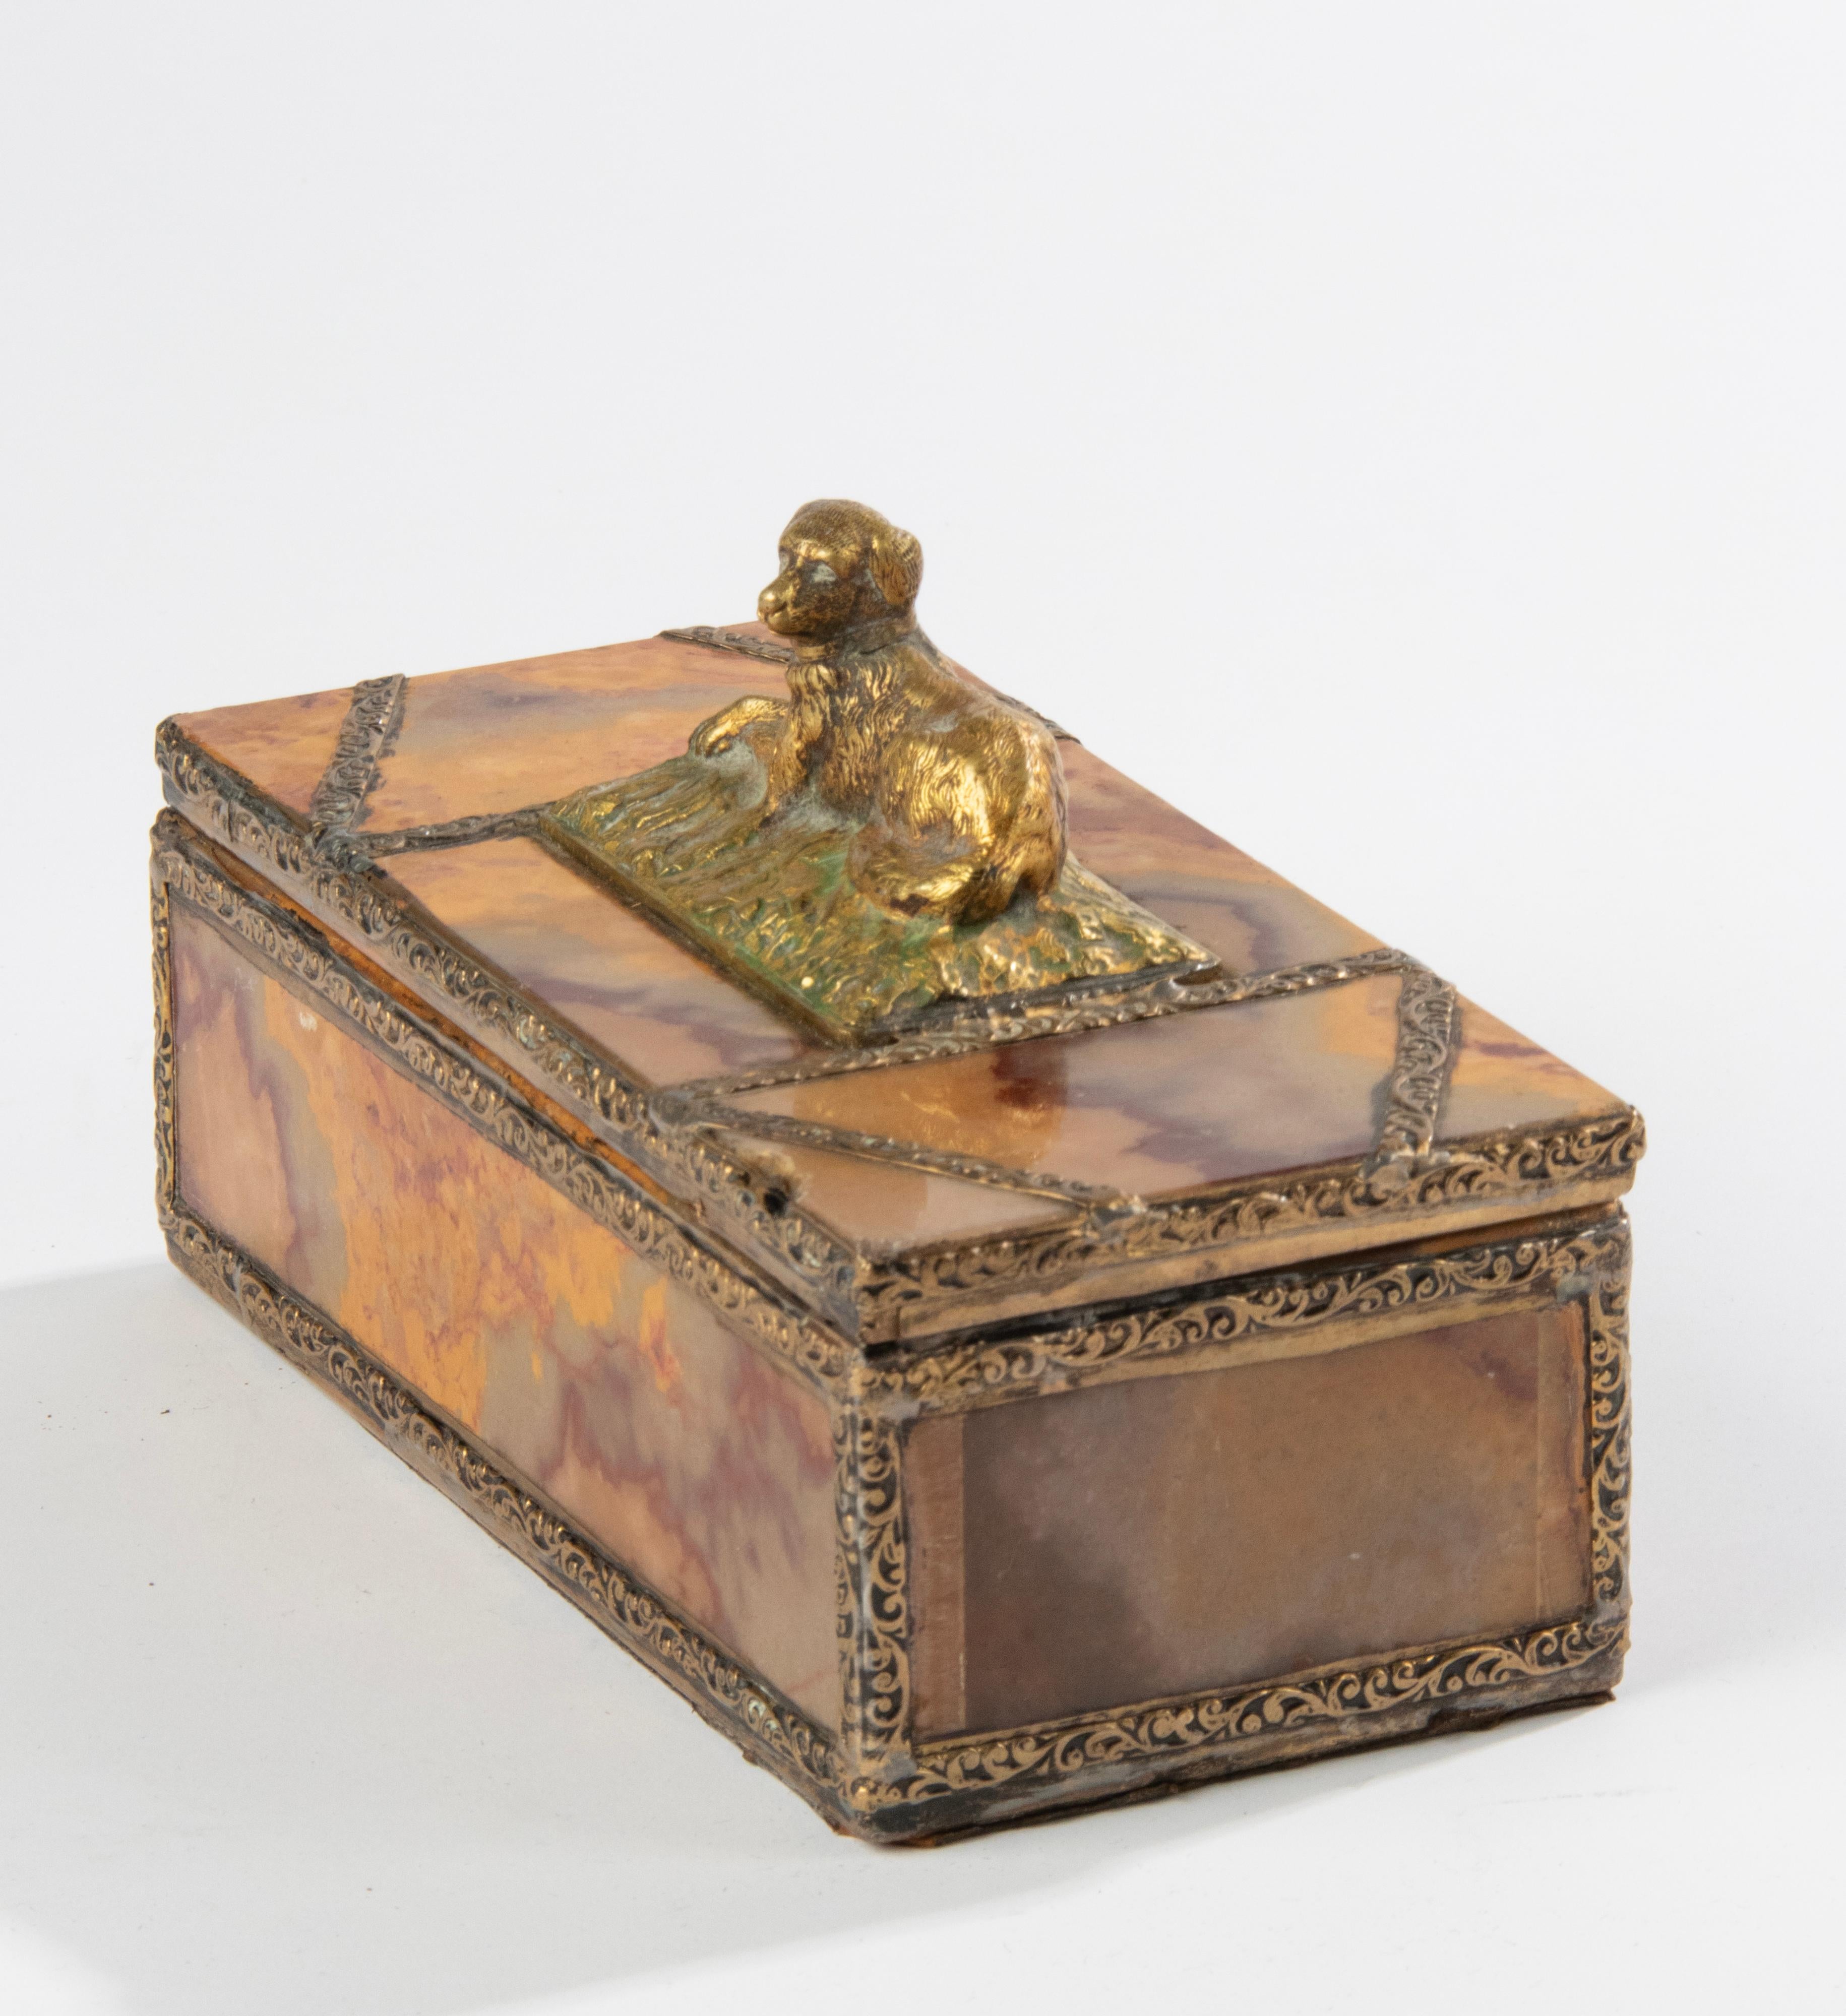 Late 19th Century Lidded Onyx box with Bronze Dog In Good Condition For Sale In Casteren, Noord-Brabant